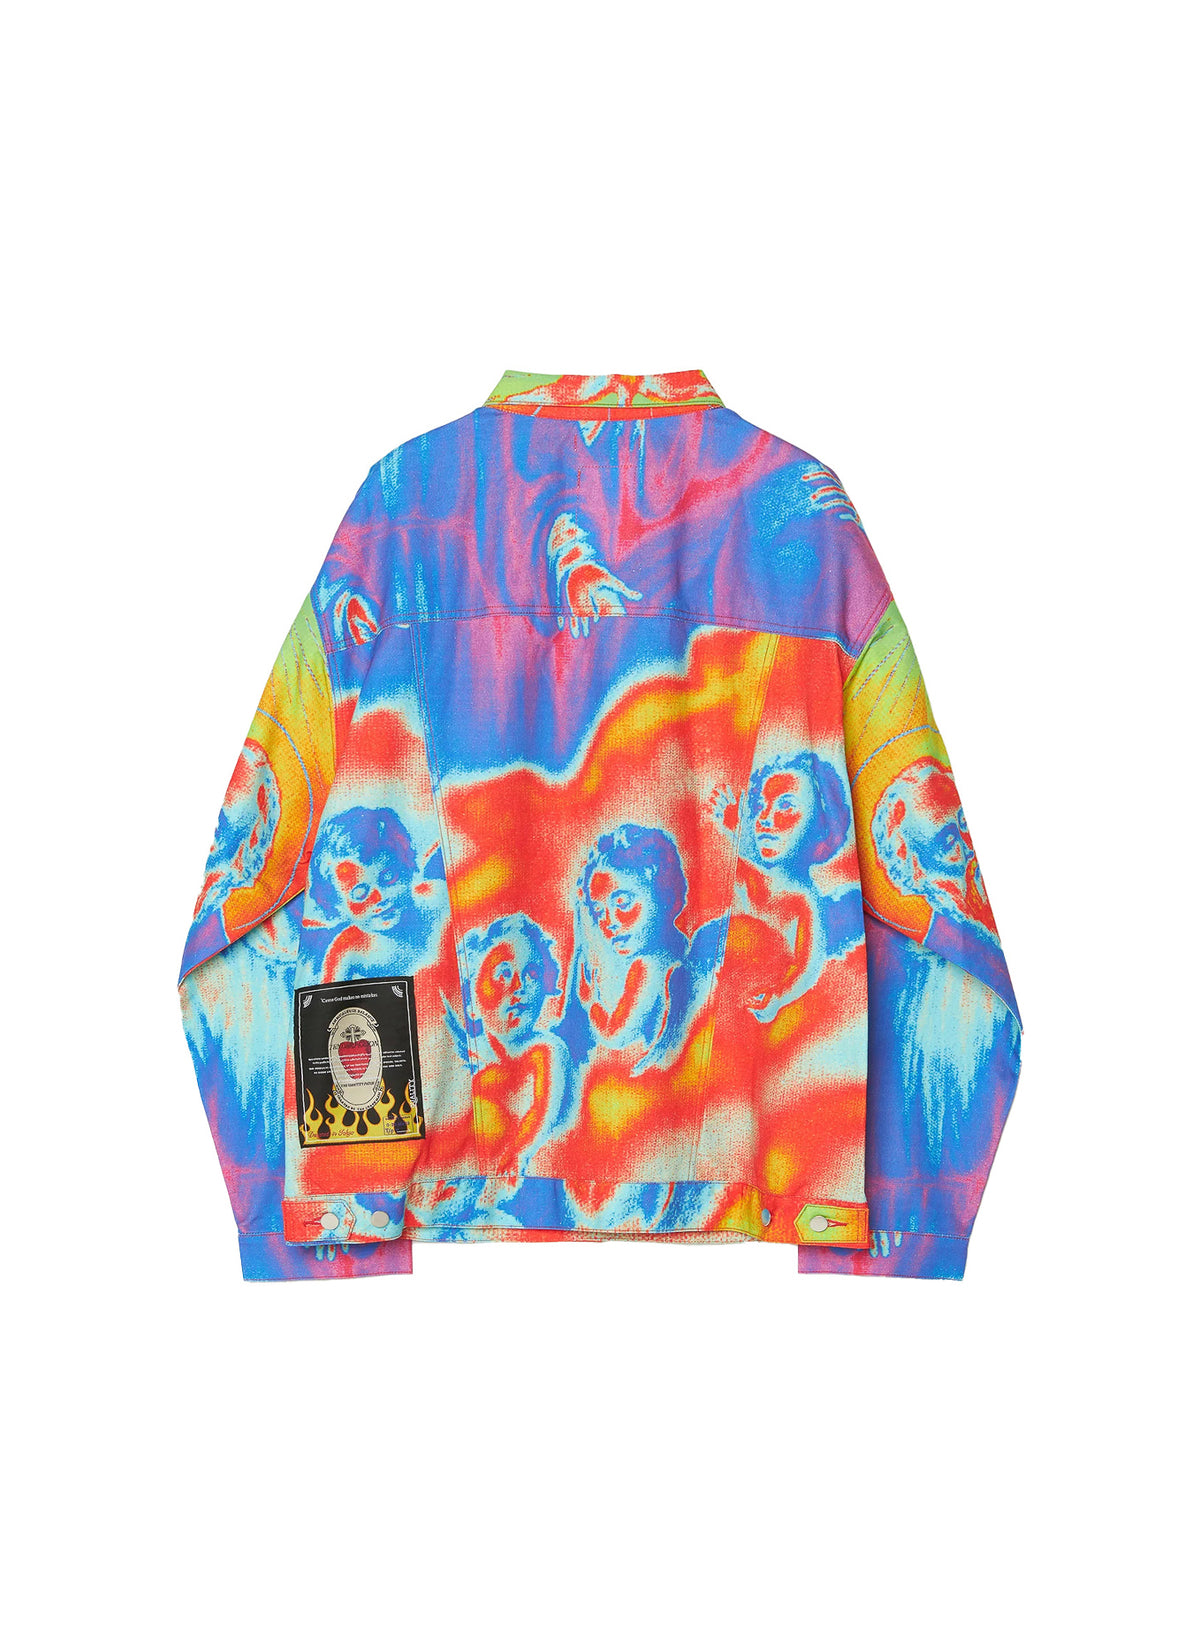 TENDER PERSON / ANGEL DENIM JACKET THERMOGRAPHY